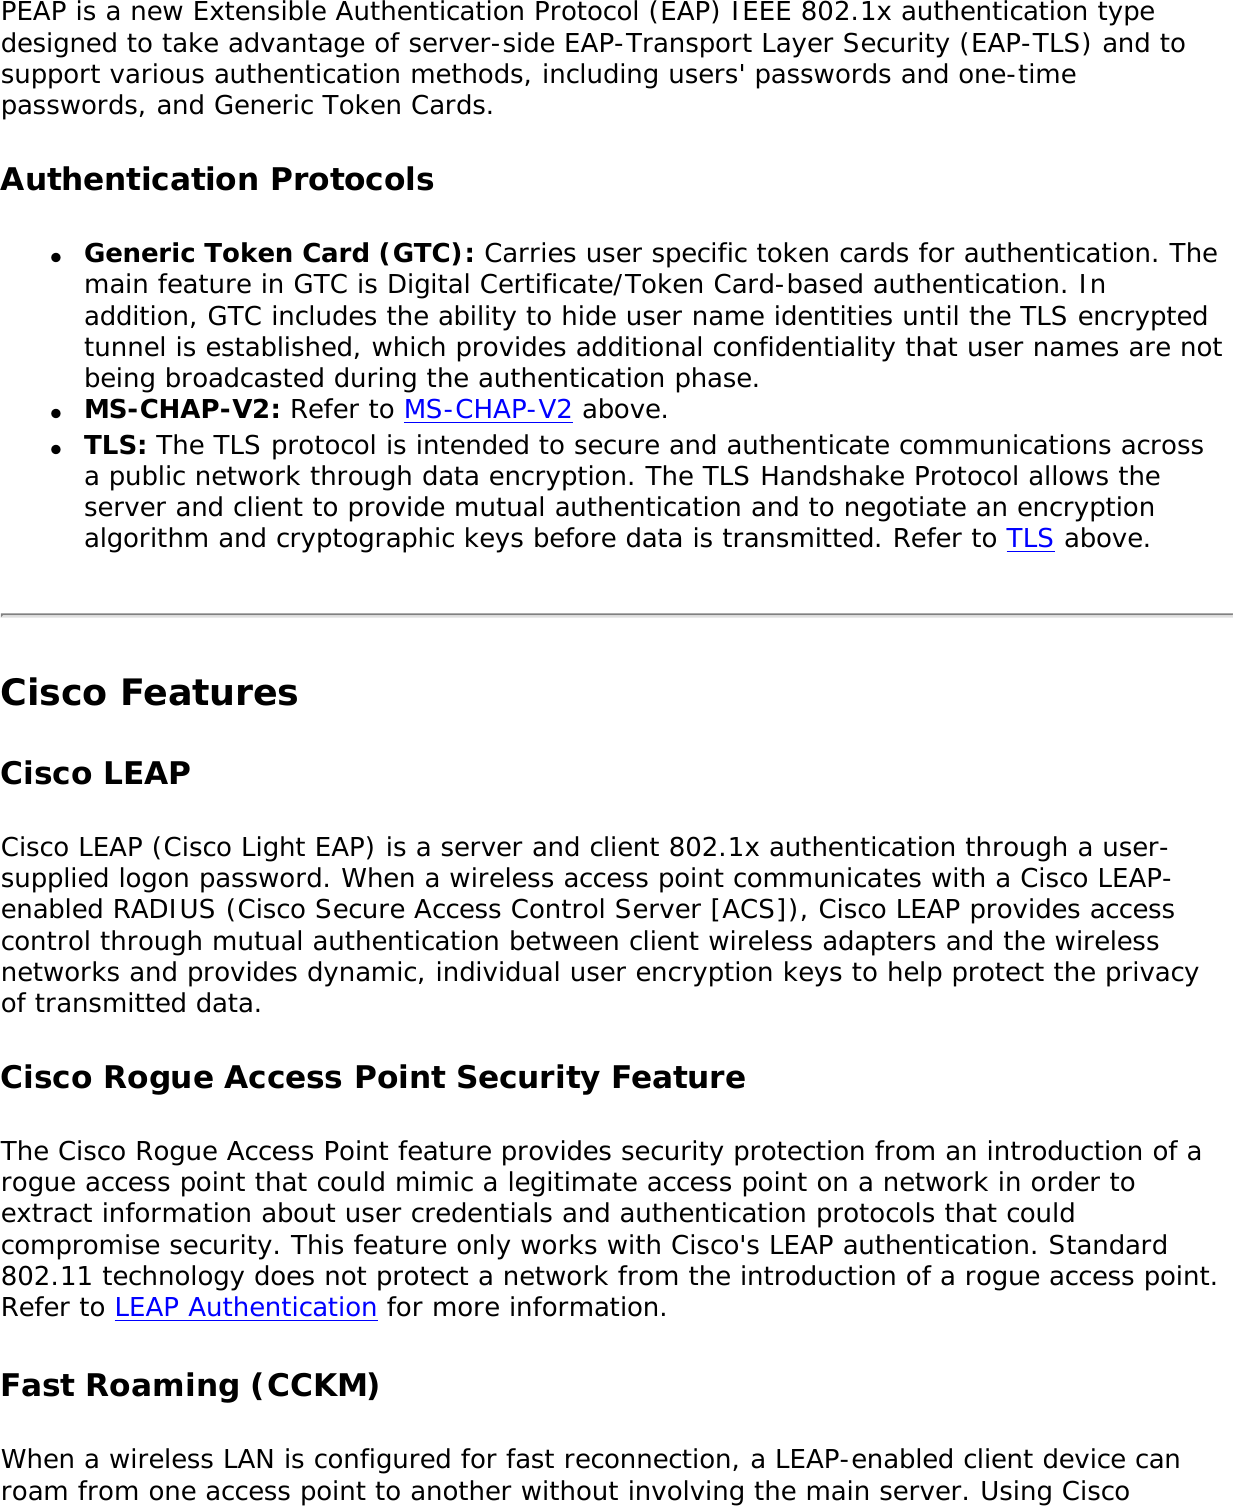 PEAP is a new Extensible Authentication Protocol (EAP) IEEE 802.1x authentication type designed to take advantage of server-side EAP-Transport Layer Security (EAP-TLS) and to support various authentication methods, including users&apos; passwords and one-time passwords, and Generic Token Cards. Authentication Protocols●     Generic Token Card (GTC): Carries user specific token cards for authentication. The main feature in GTC is Digital Certificate/Token Card-based authentication. In addition, GTC includes the ability to hide user name identities until the TLS encrypted tunnel is established, which provides additional confidentiality that user names are not being broadcasted during the authentication phase. ●     MS-CHAP-V2: Refer to MS-CHAP-V2 above. ●     TLS: The TLS protocol is intended to secure and authenticate communications across a public network through data encryption. The TLS Handshake Protocol allows the server and client to provide mutual authentication and to negotiate an encryption algorithm and cryptographic keys before data is transmitted. Refer to TLS above. Cisco FeaturesCisco LEAP Cisco LEAP (Cisco Light EAP) is a server and client 802.1x authentication through a user-supplied logon password. When a wireless access point communicates with a Cisco LEAP-enabled RADIUS (Cisco Secure Access Control Server [ACS]), Cisco LEAP provides access control through mutual authentication between client wireless adapters and the wireless networks and provides dynamic, individual user encryption keys to help protect the privacy of transmitted data. Cisco Rogue Access Point Security FeatureThe Cisco Rogue Access Point feature provides security protection from an introduction of a rogue access point that could mimic a legitimate access point on a network in order to extract information about user credentials and authentication protocols that could compromise security. This feature only works with Cisco&apos;s LEAP authentication. Standard 802.11 technology does not protect a network from the introduction of a rogue access point. Refer to LEAP Authentication for more information. Fast Roaming (CCKM)When a wireless LAN is configured for fast reconnection, a LEAP-enabled client device can roam from one access point to another without involving the main server. Using Cisco 